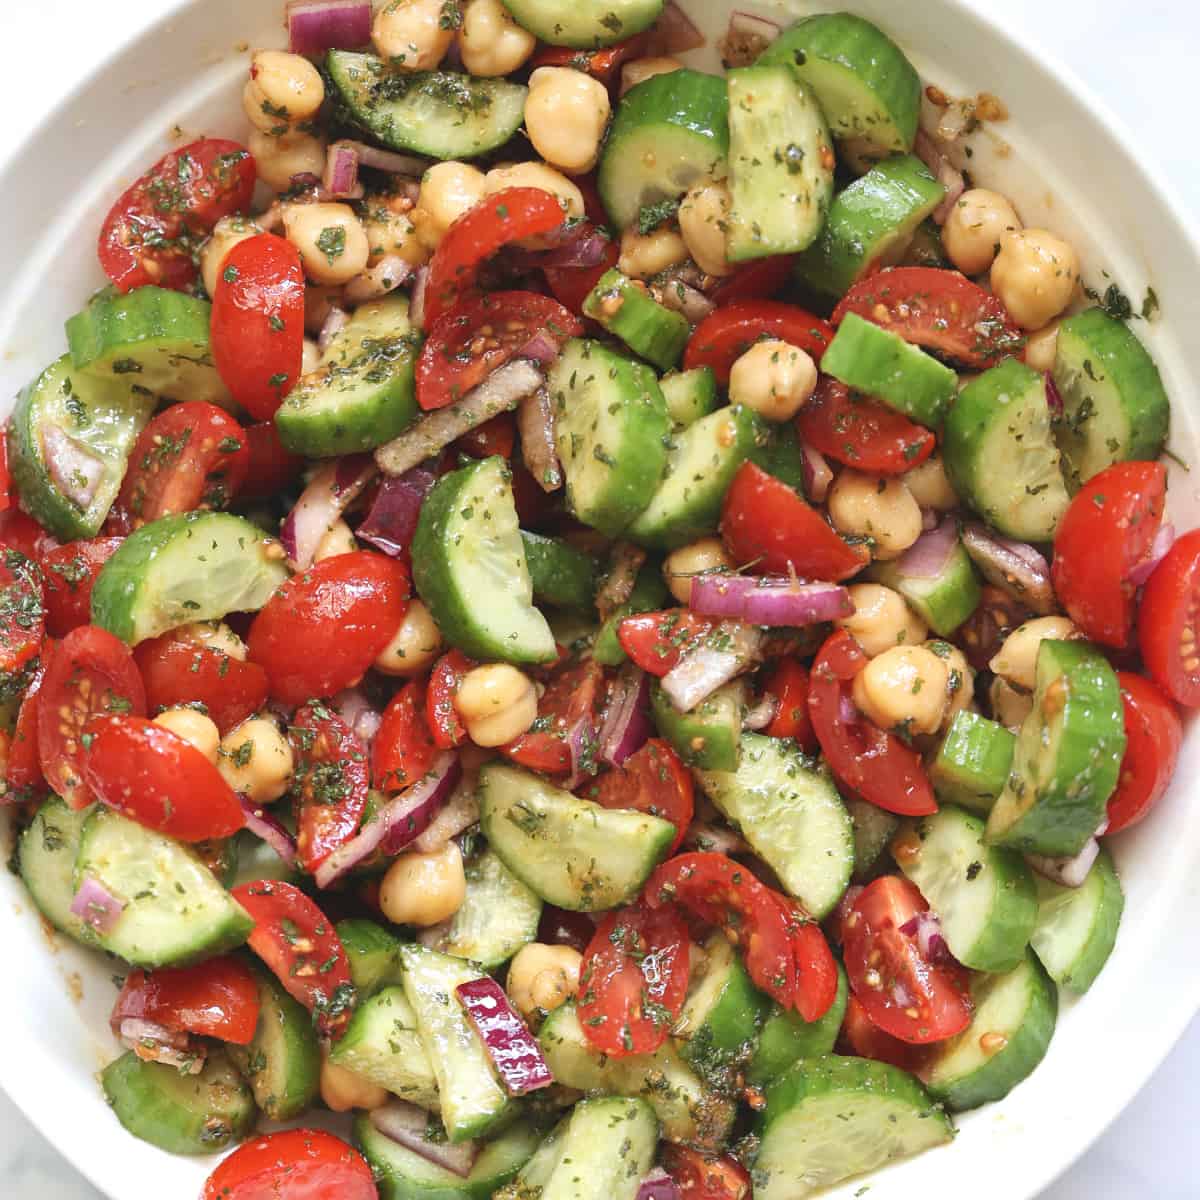 Cucumber Tomato Salad with Balsamic Dressing